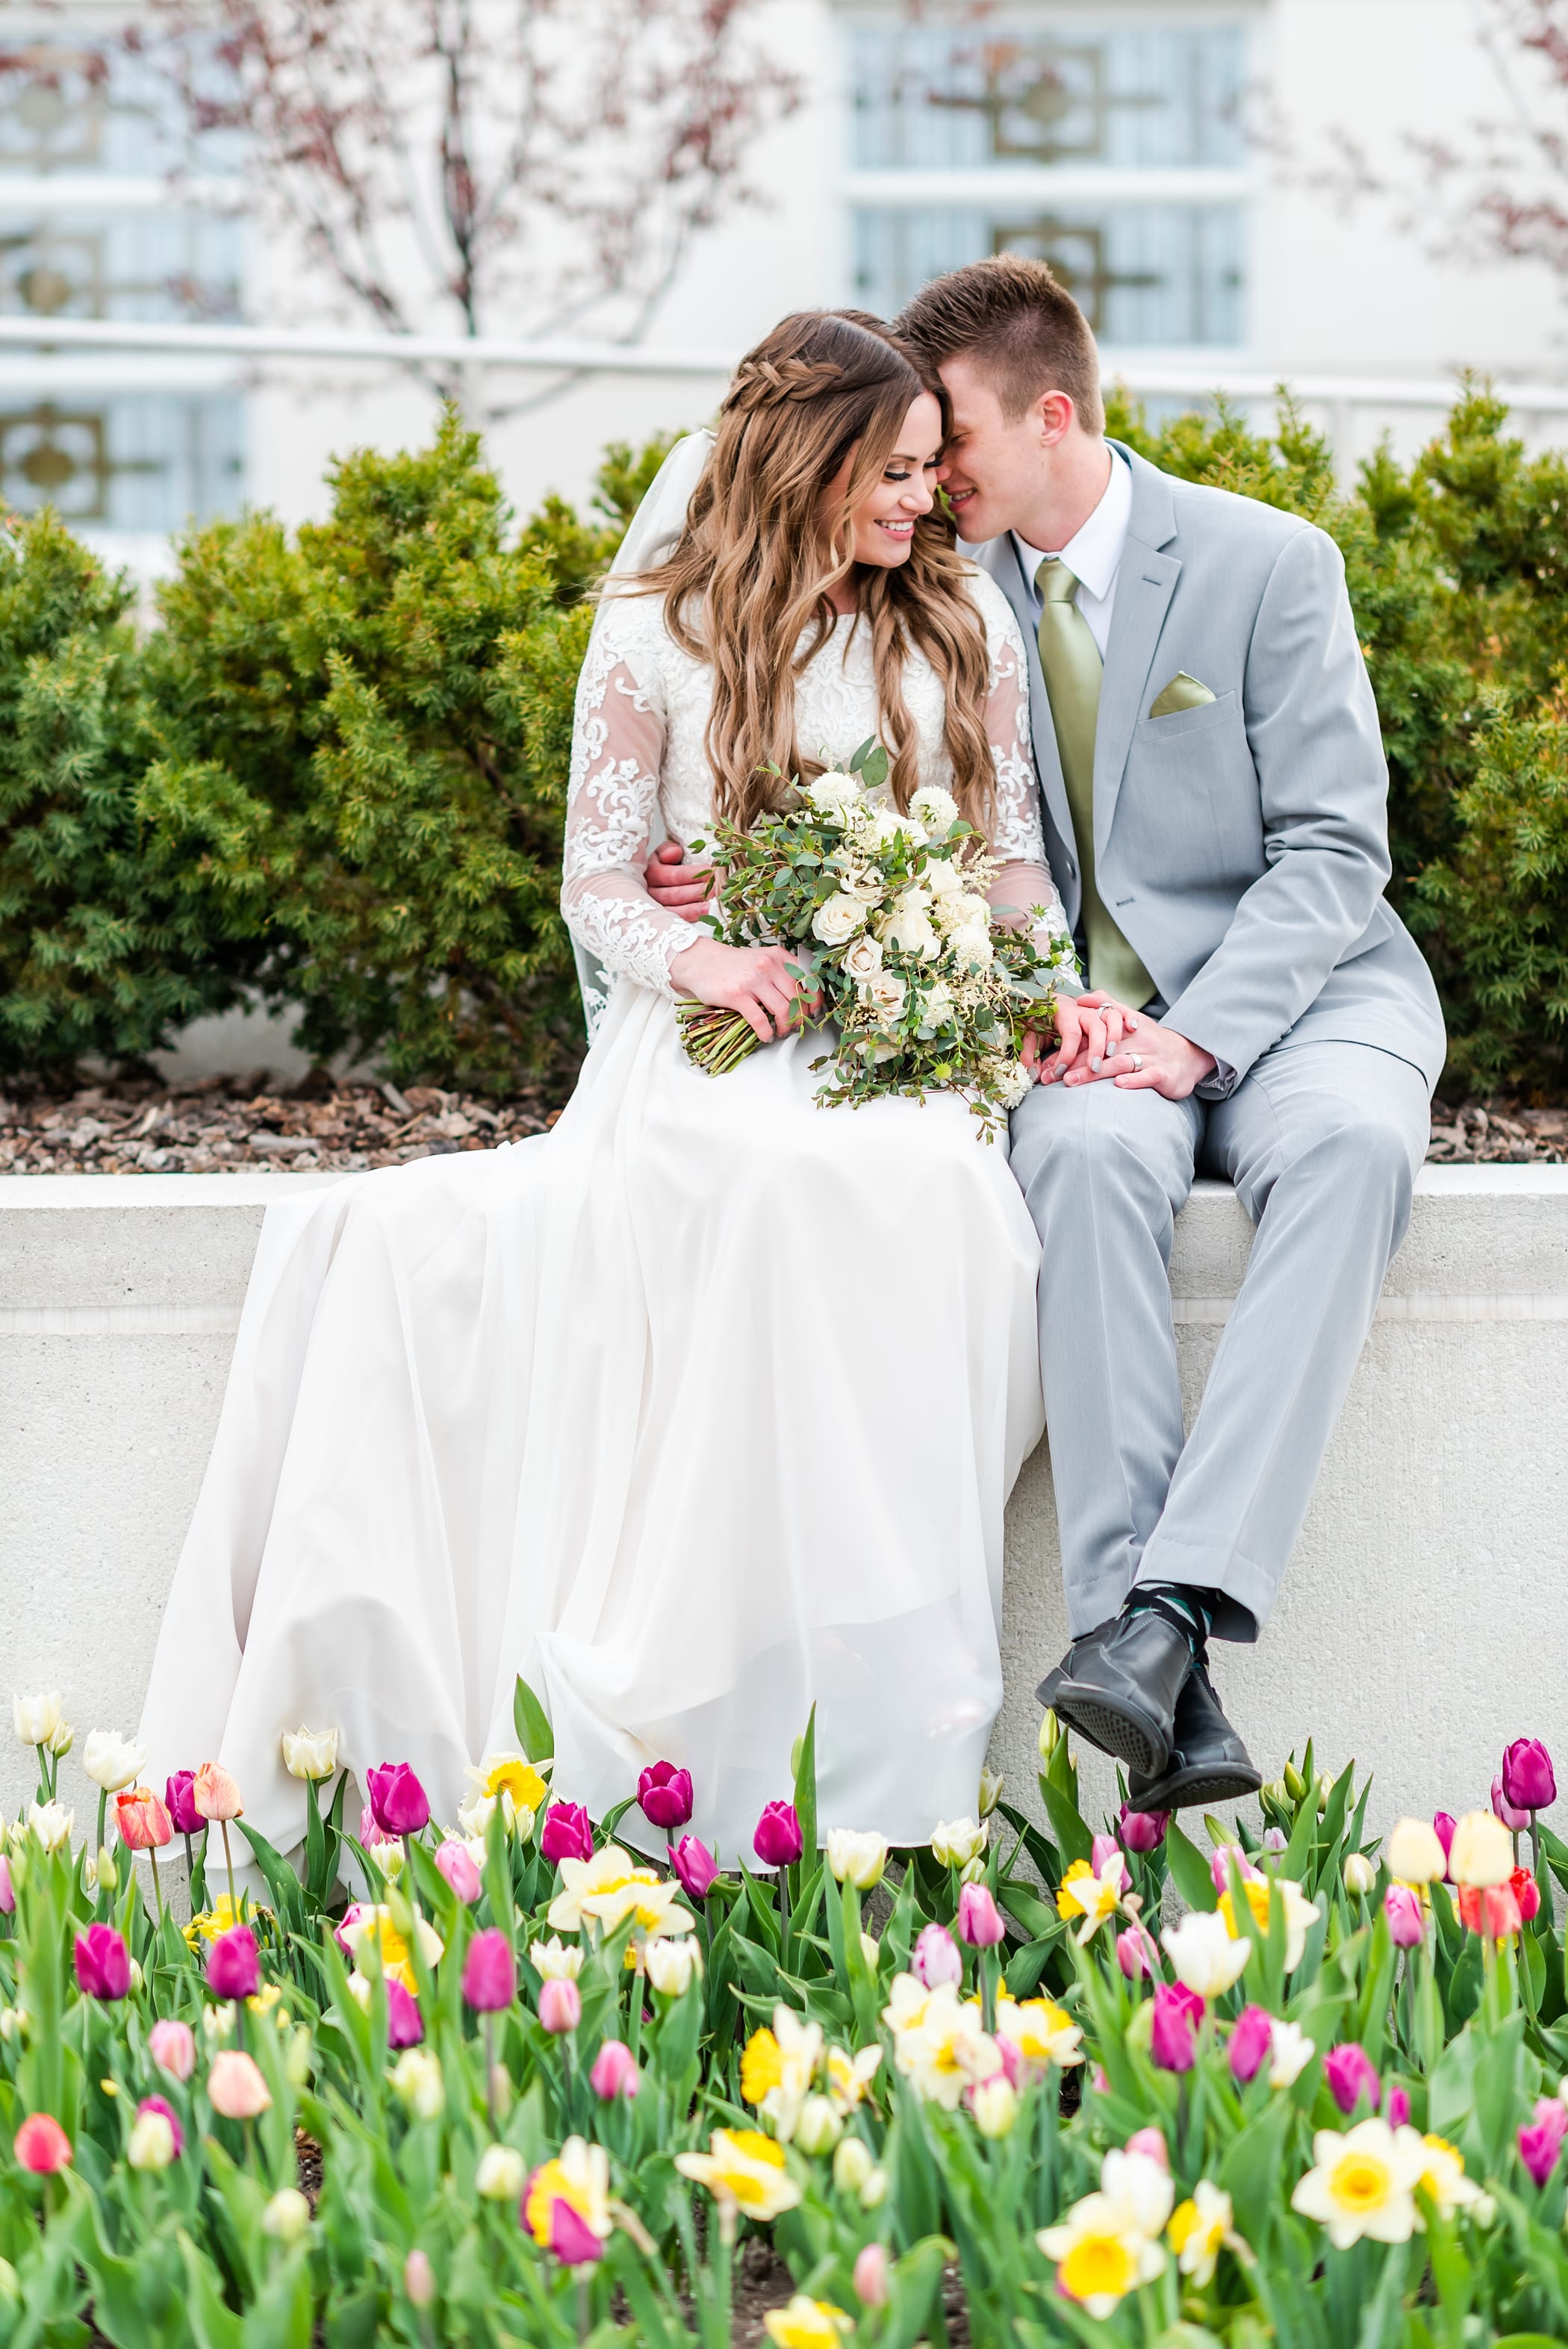 Tulip wedding photo at the Idaho Falls temple in spring